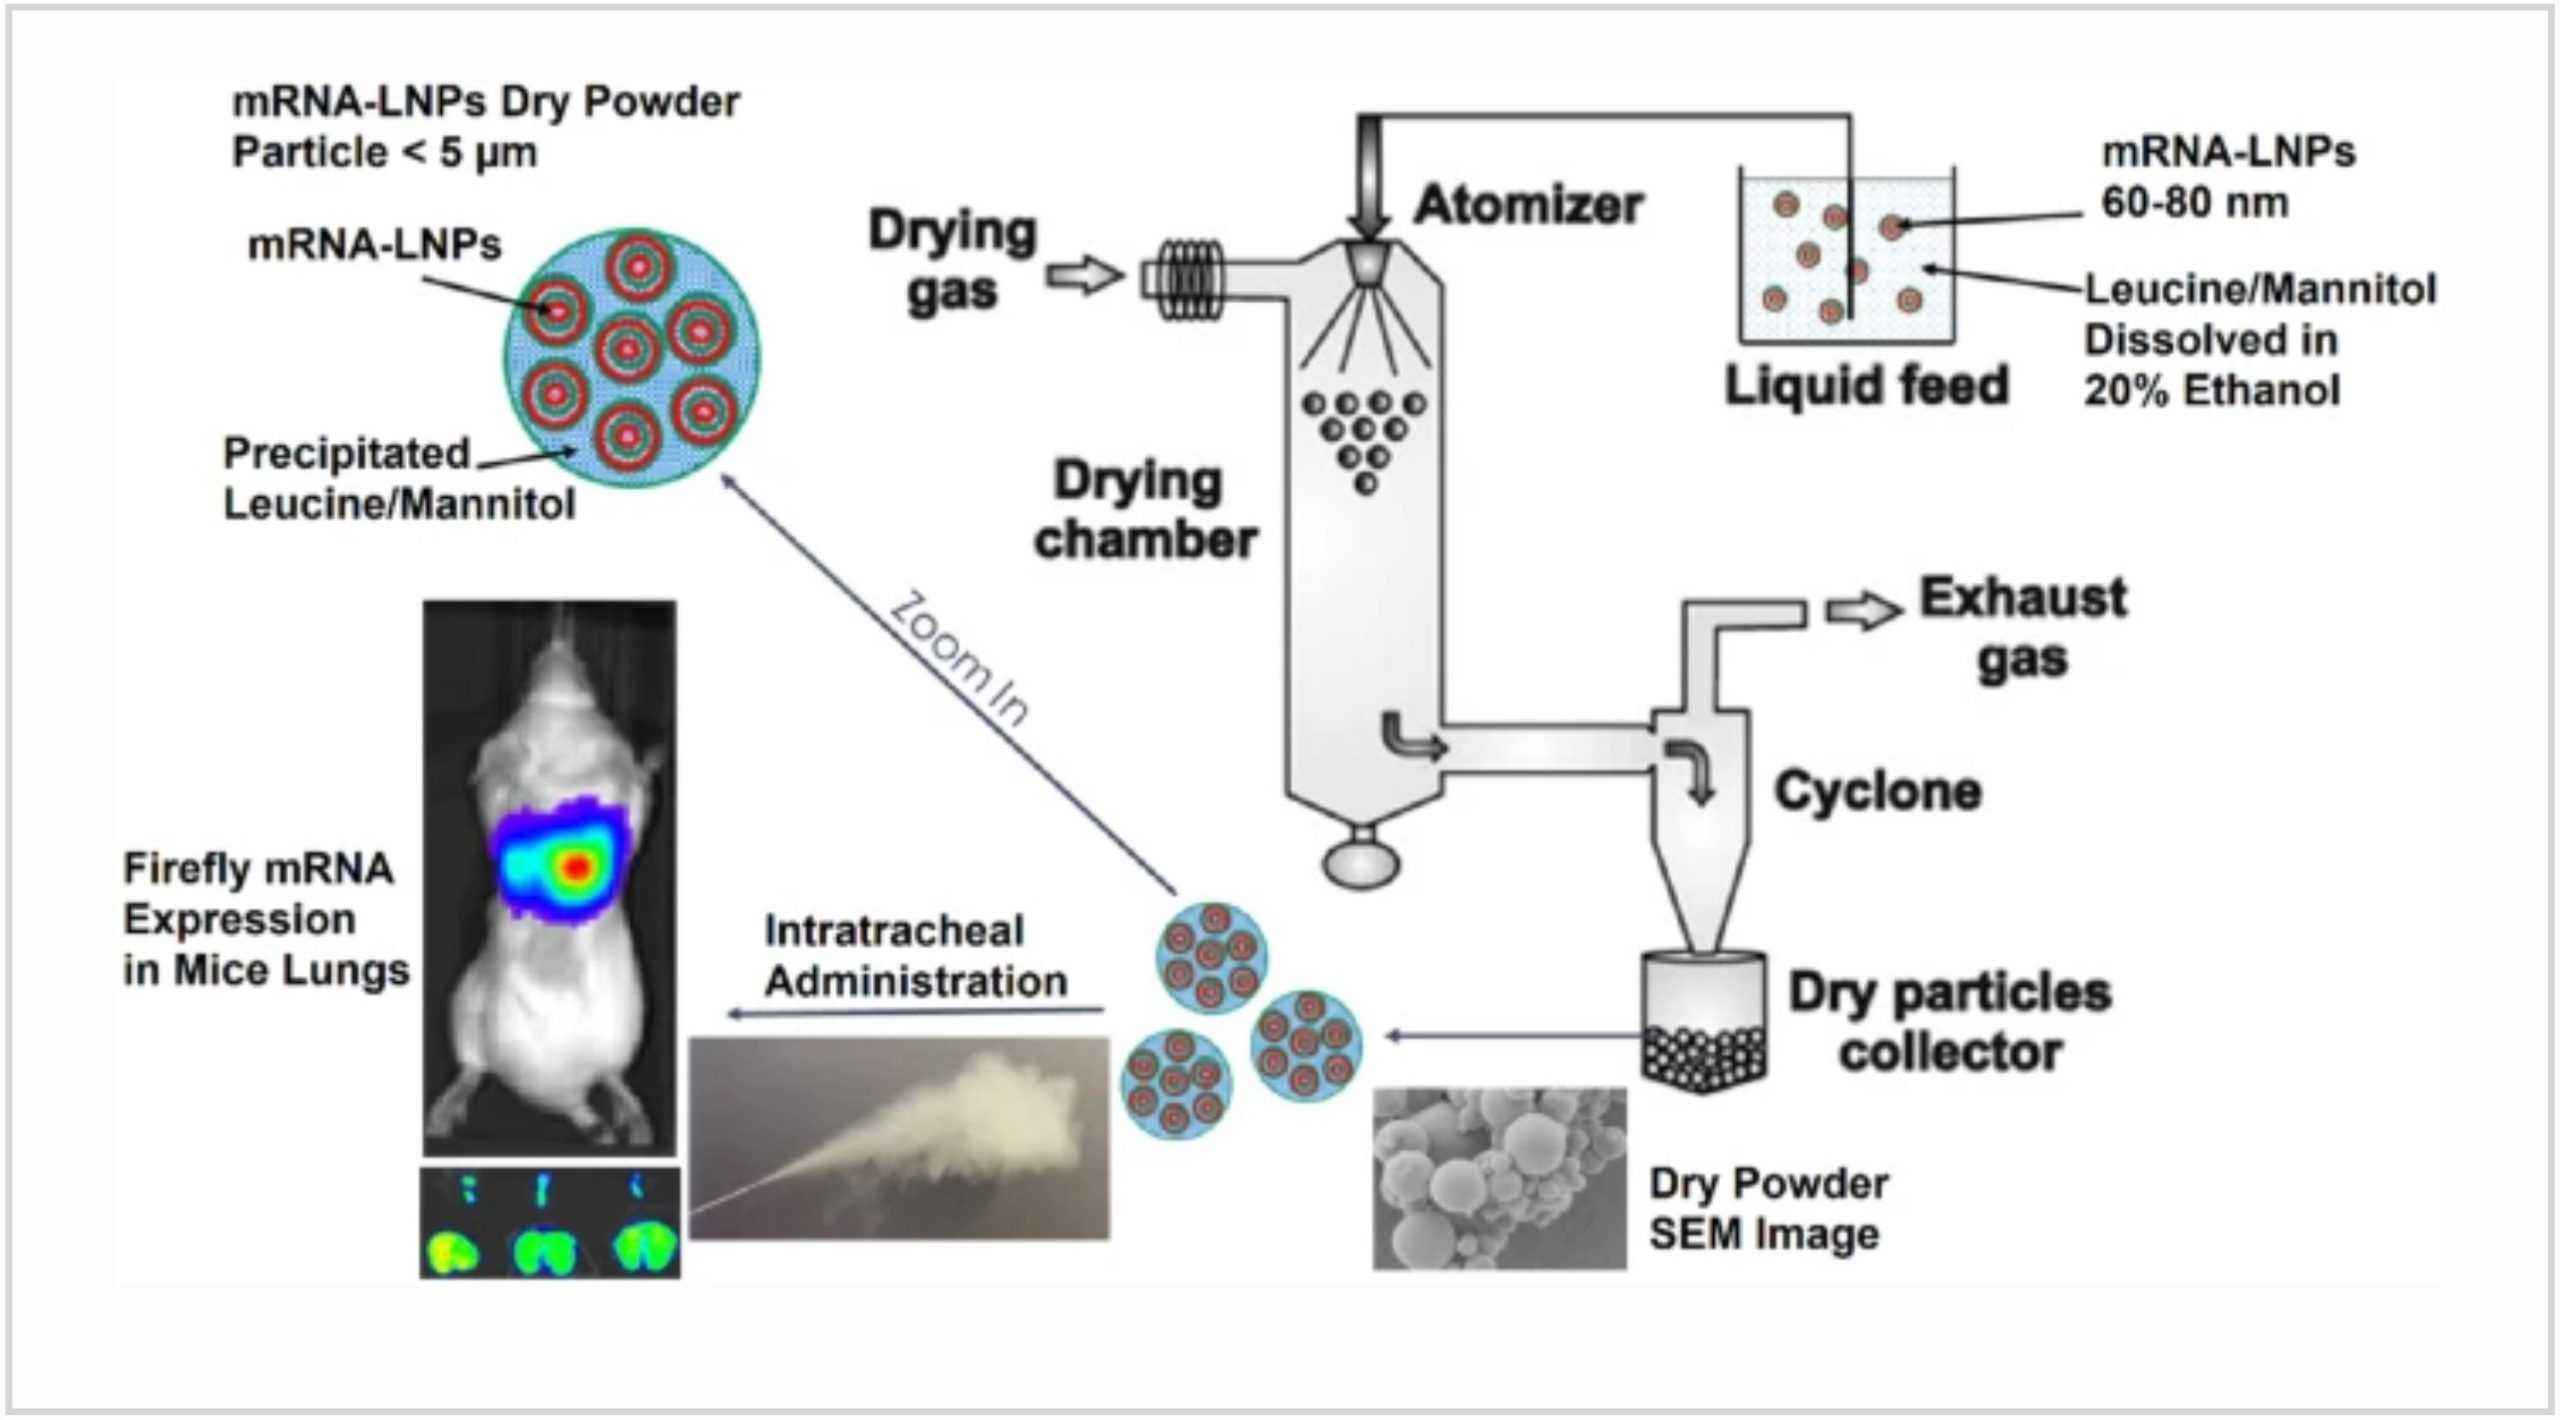 Inhalable dry powder product (DPP) of mRNA lipid nanoparticles (LNPs) for pulmonary delivery